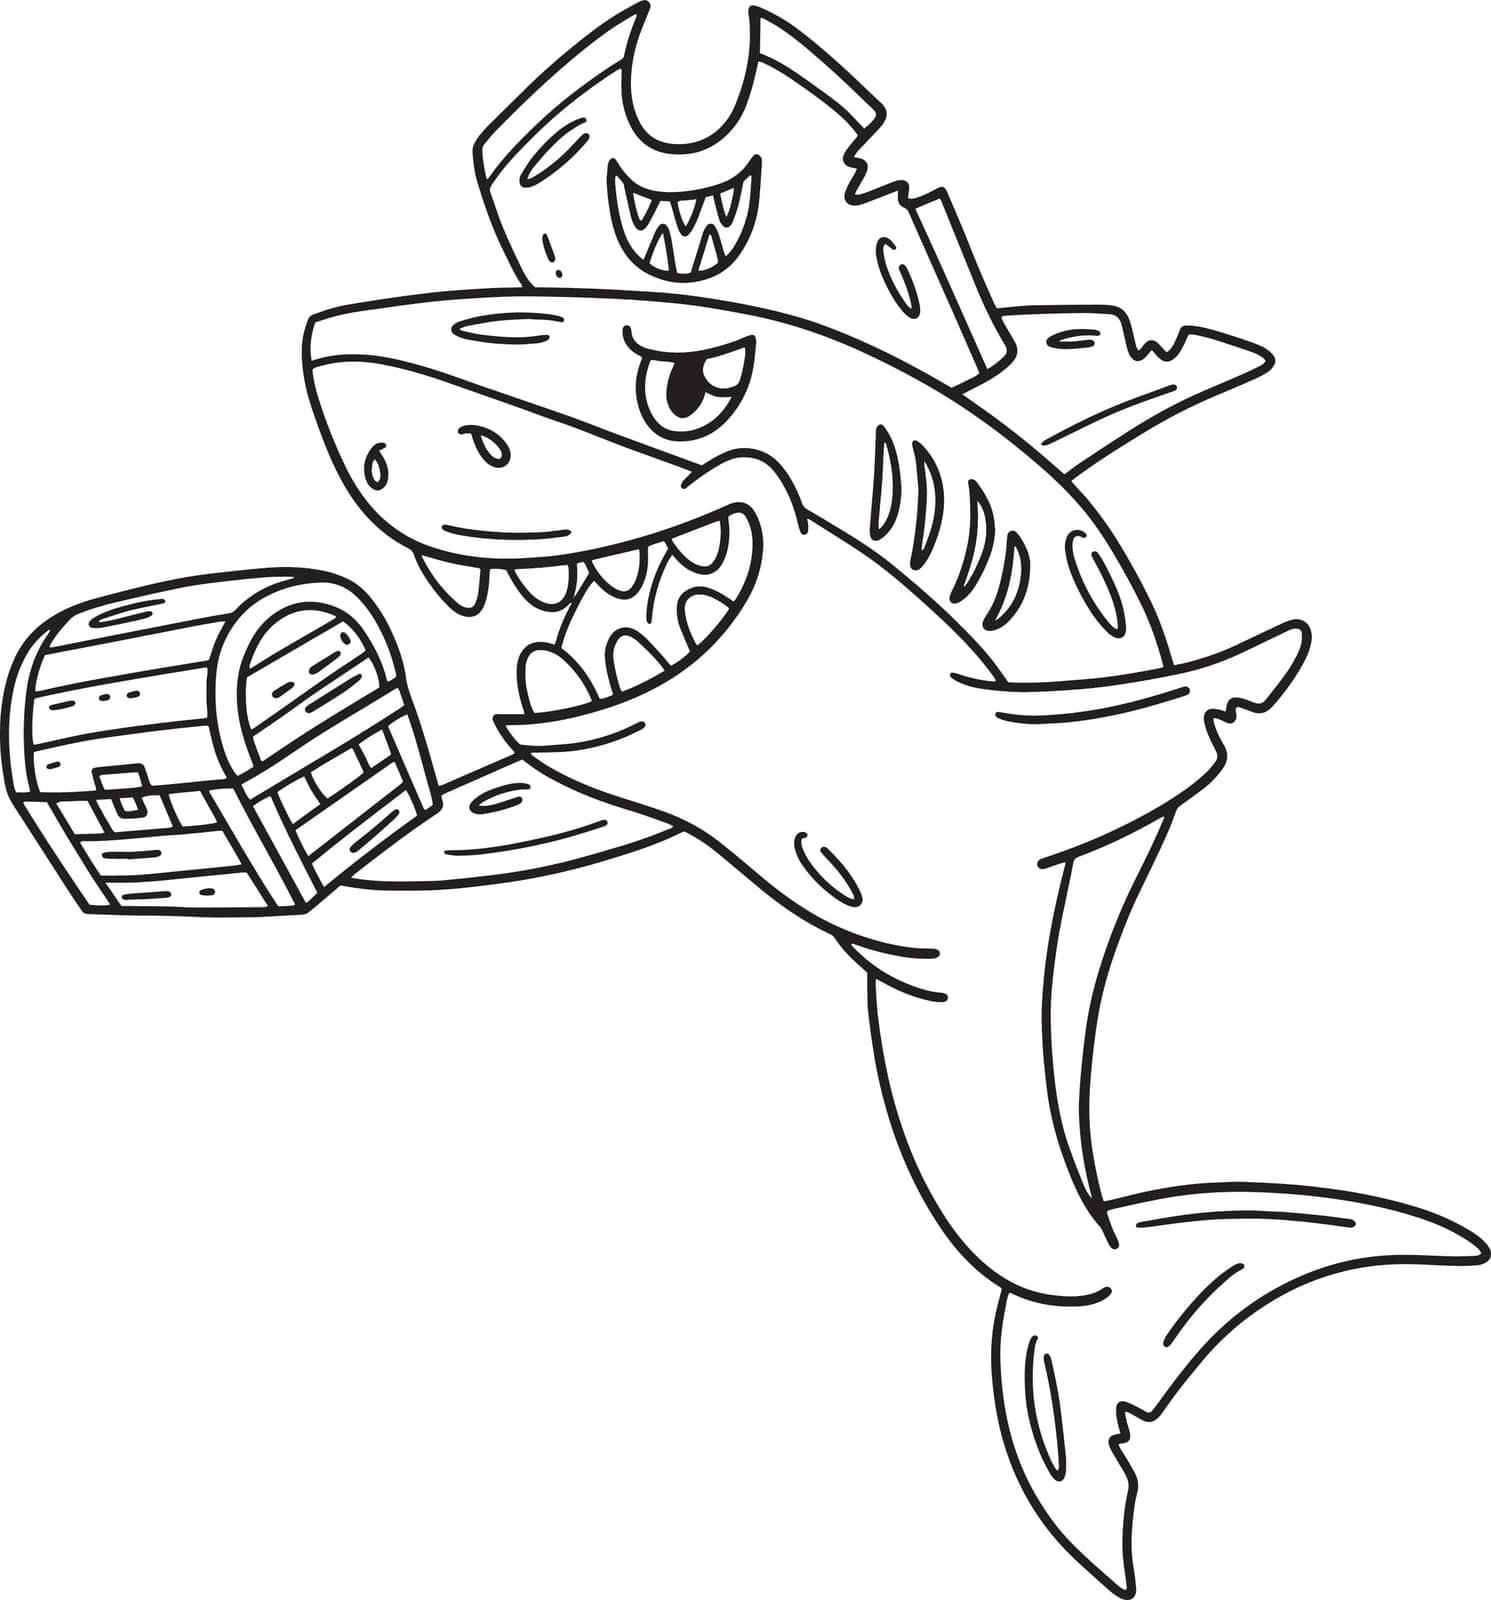 Pirate Shark with a Treasure Chest Isolated by abbydesign